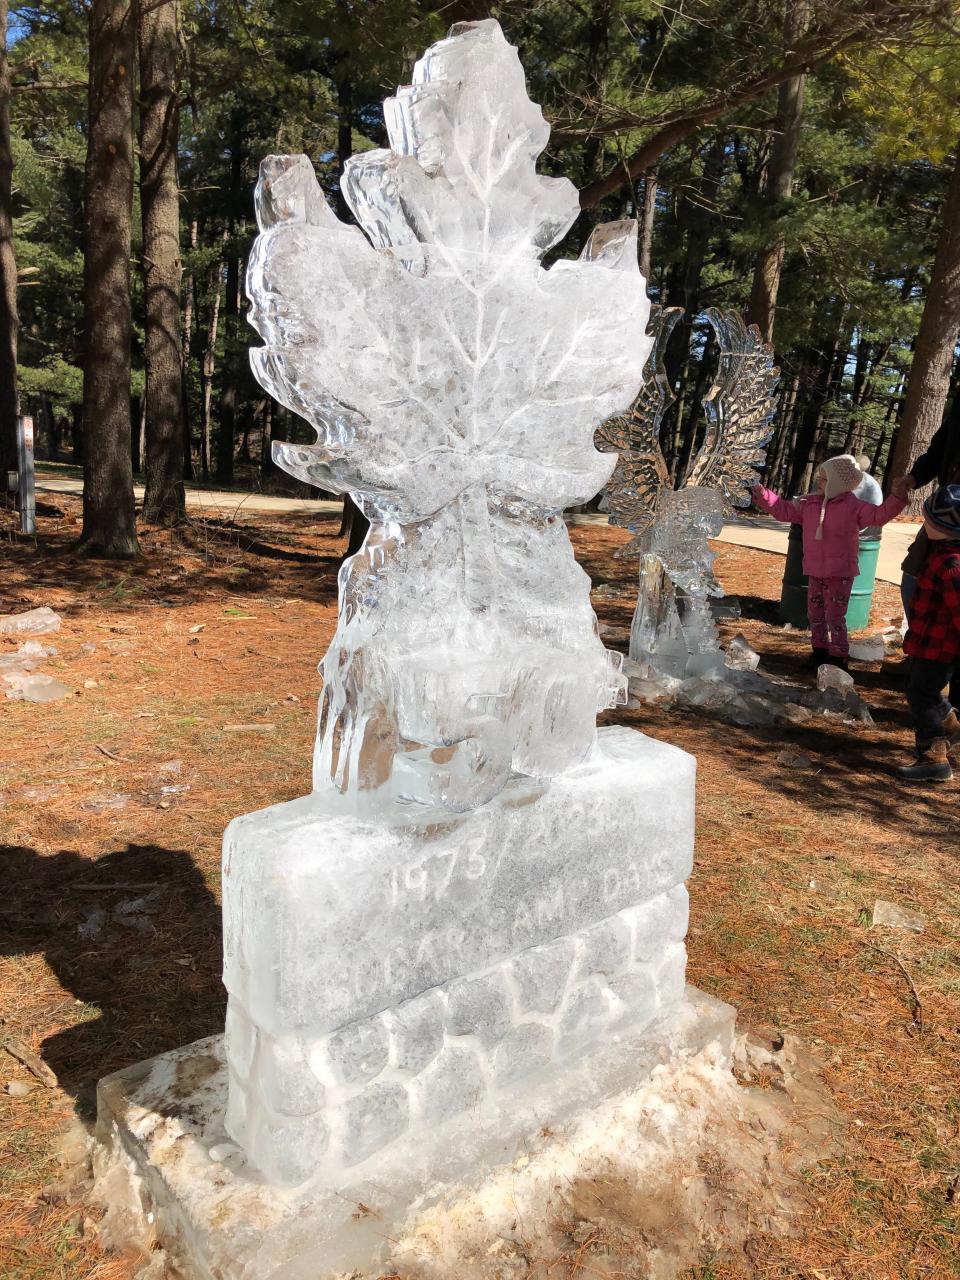 Ice carvings like this one in 2023 will again be part of Sugar Camp Days at Bendix Woods County Park in New Carlisle.